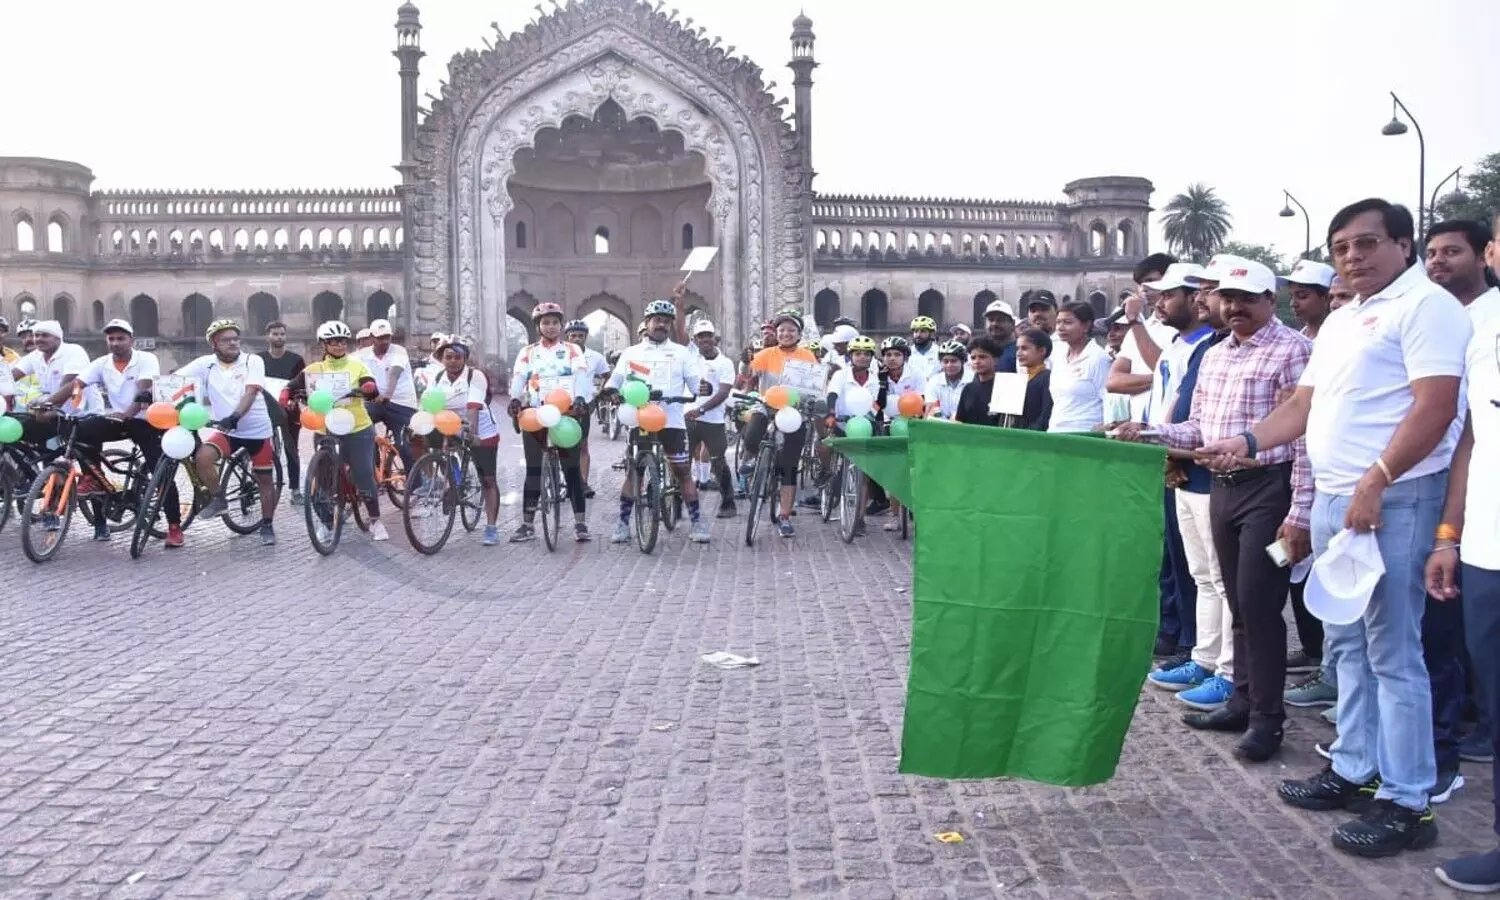 Cycle rally organized in Lucknow